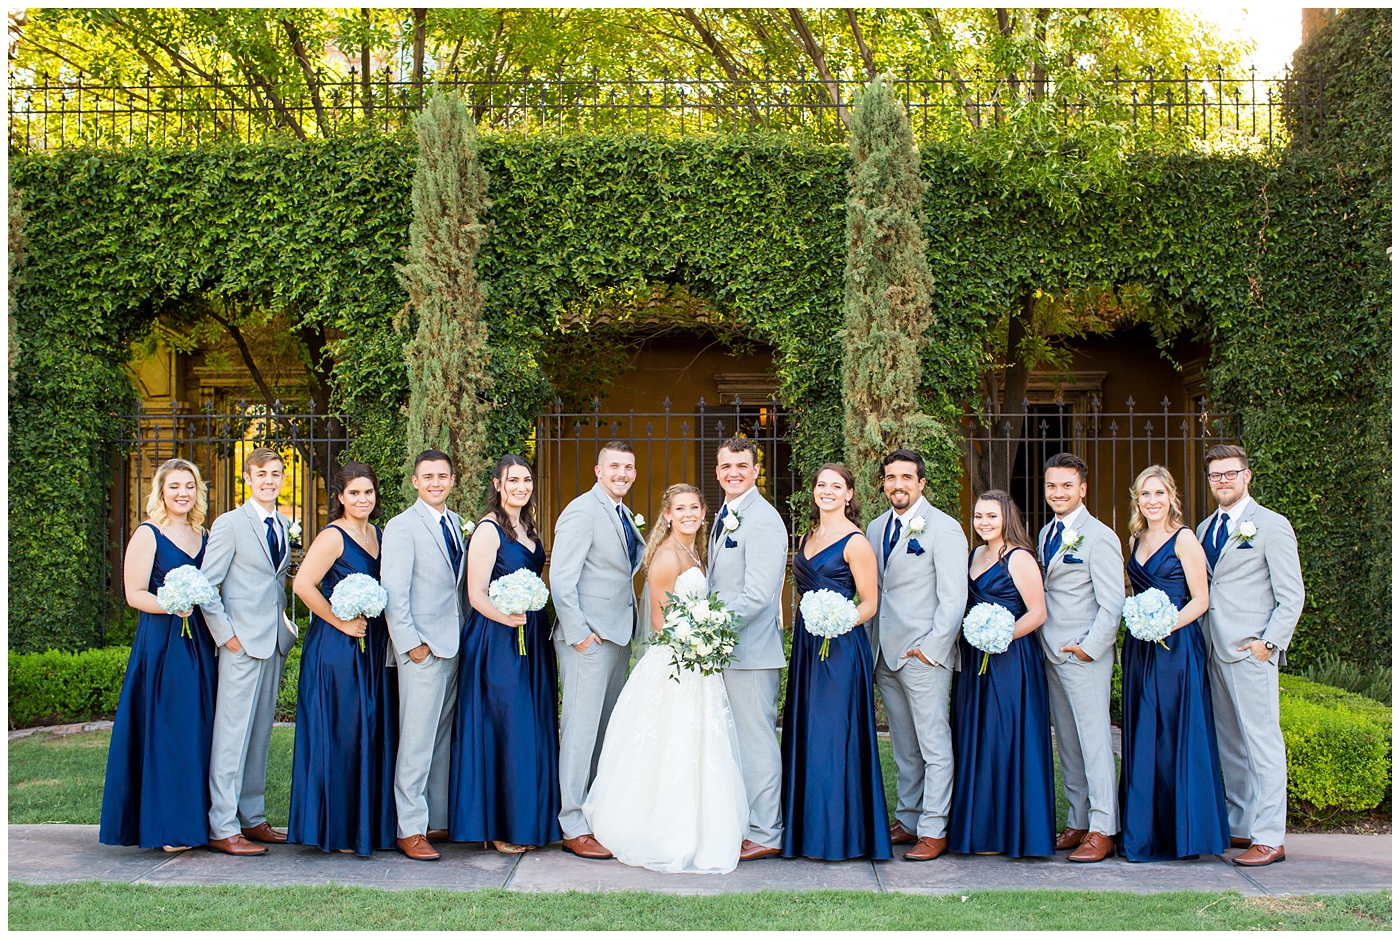 bride in strapless lace dress with white flower bouquet with roses and hydrangeas with bridesmaids in royal blue long dresses with blue hydrangeas bouquets with groom in grey suit with blue tie and white rose boutonniere and groomsmen in grey suits with royal blue vests and ties wedding party group shot 